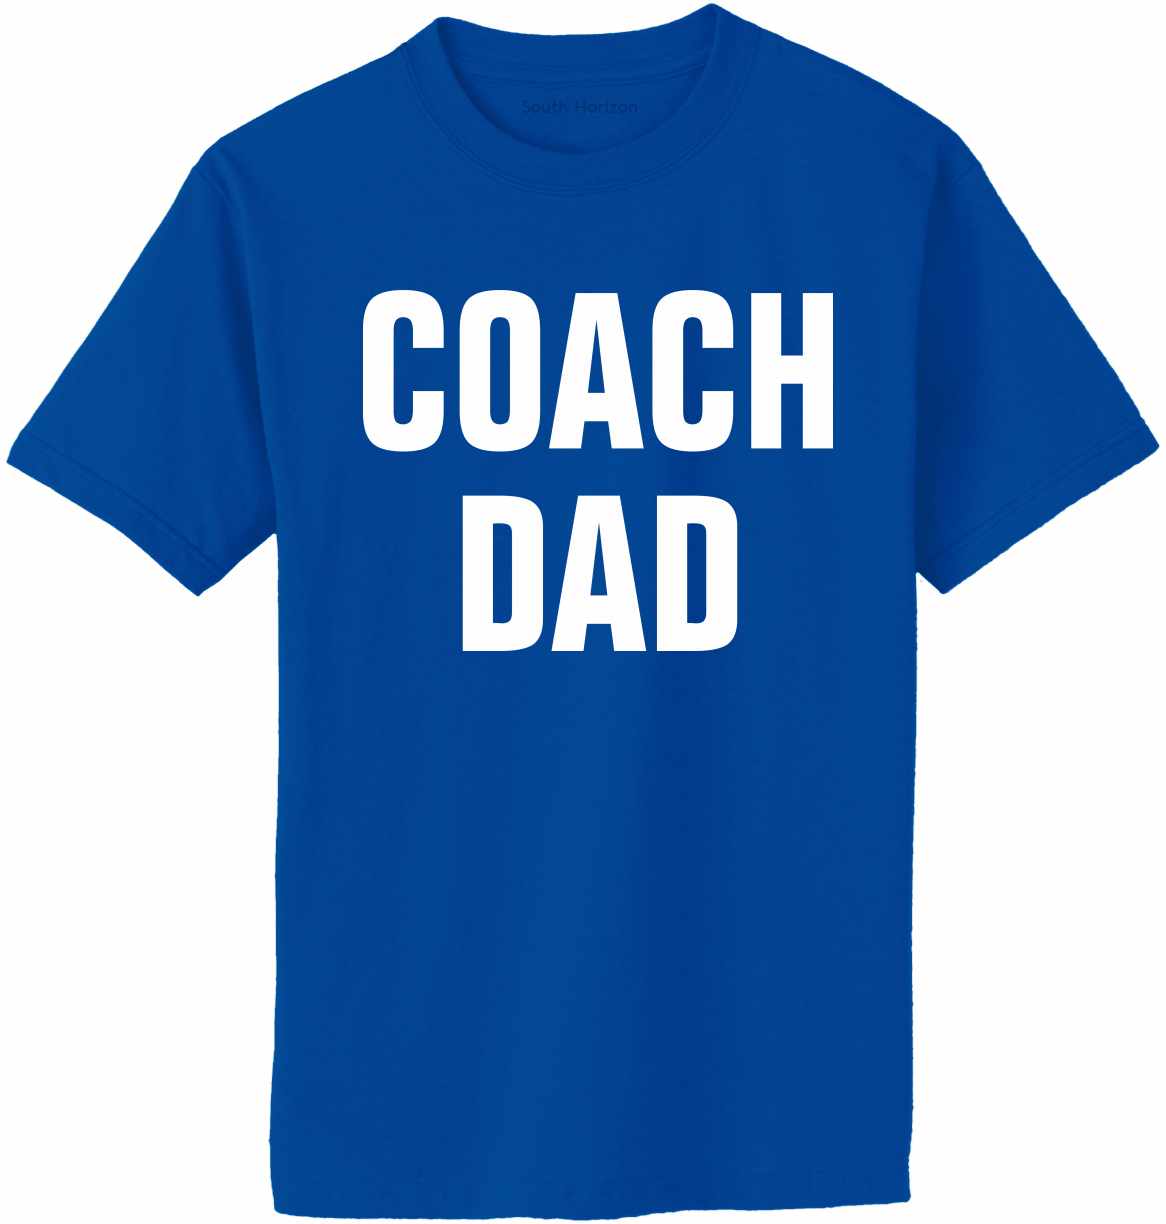 Coach Dad on Adult T-Shirt